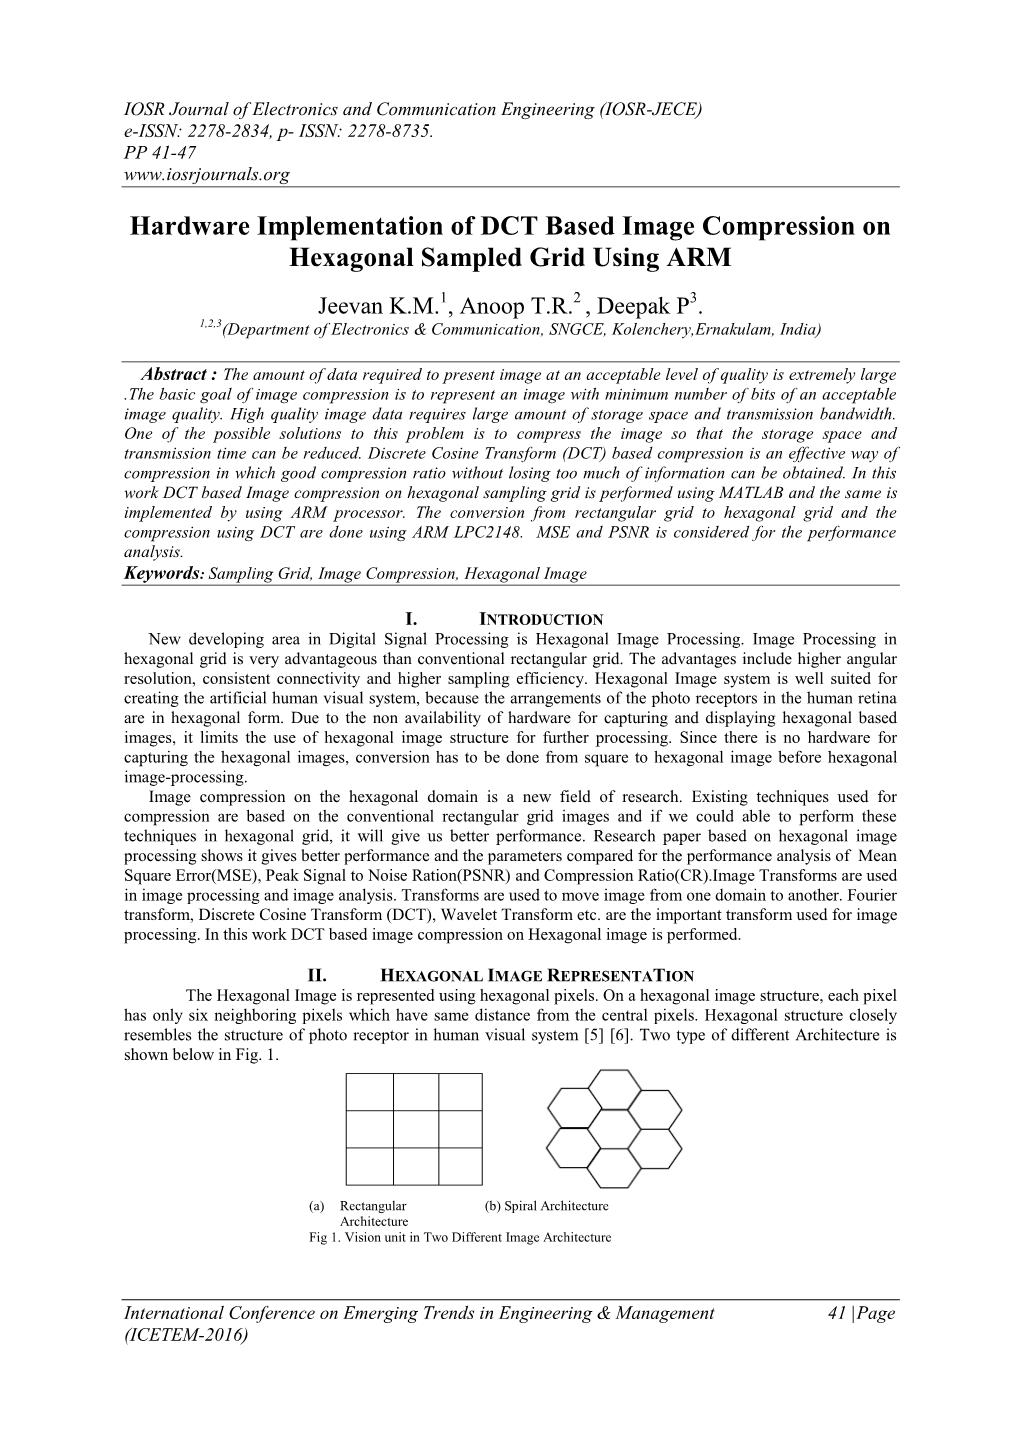 Hardware Implementation of DCT Based Image Compression on Hexagonal Sampled Grid Using ARM